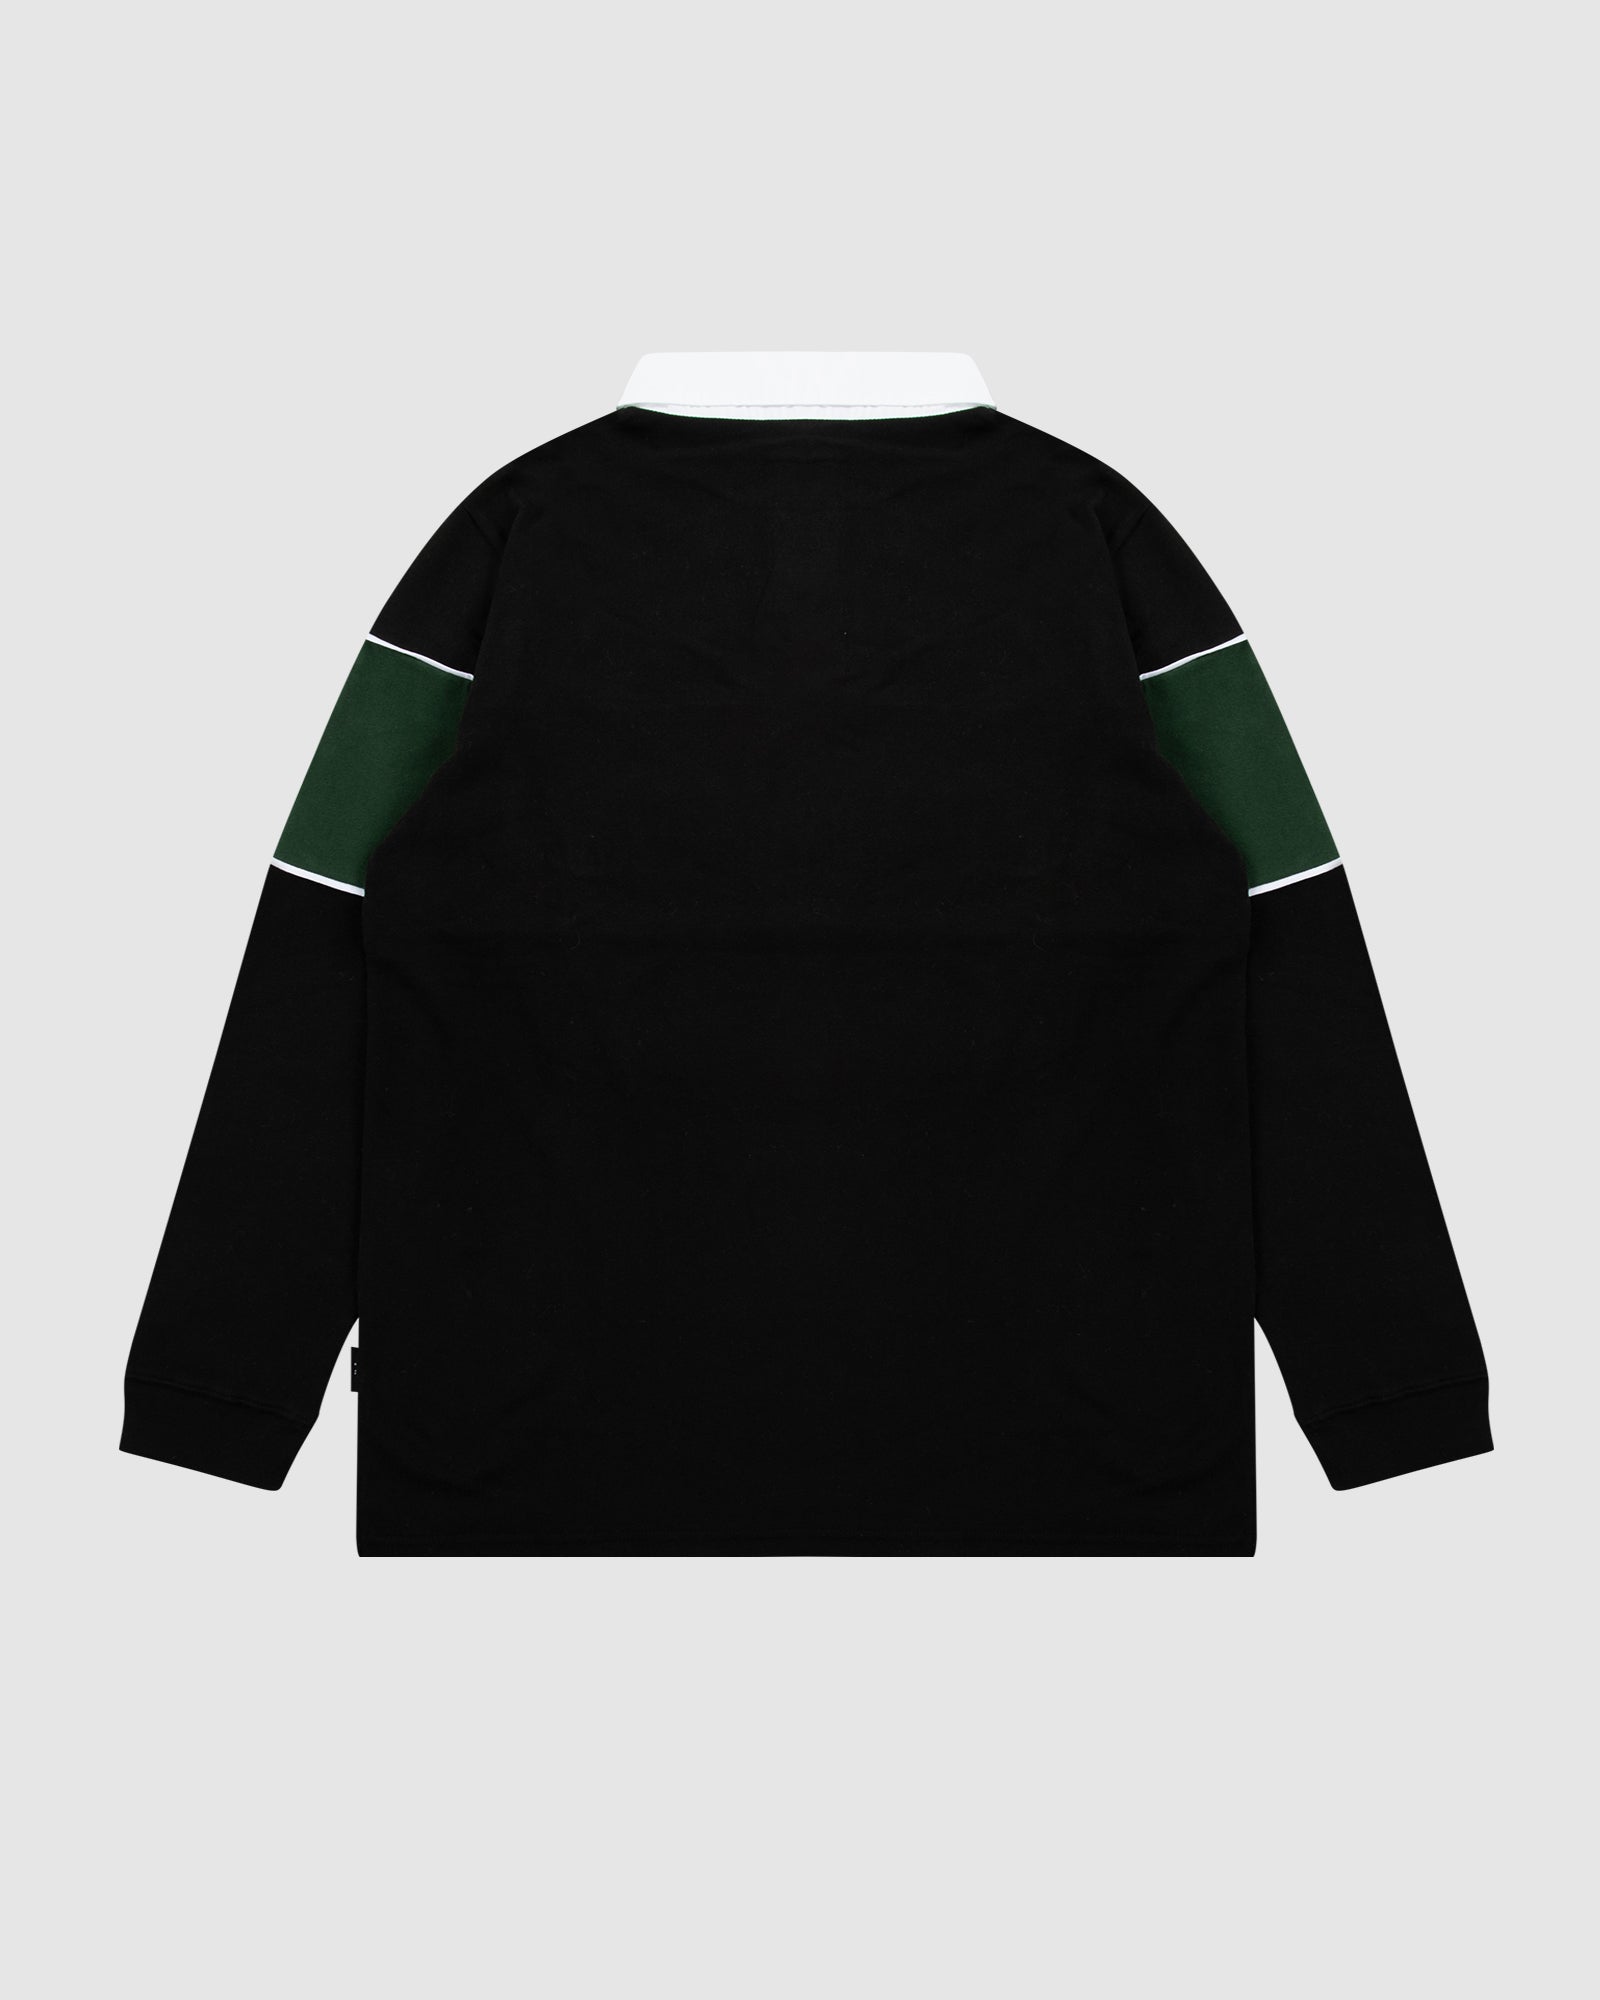 INT PANEL RUGBY TOP - BLACK/FOREST GREEN